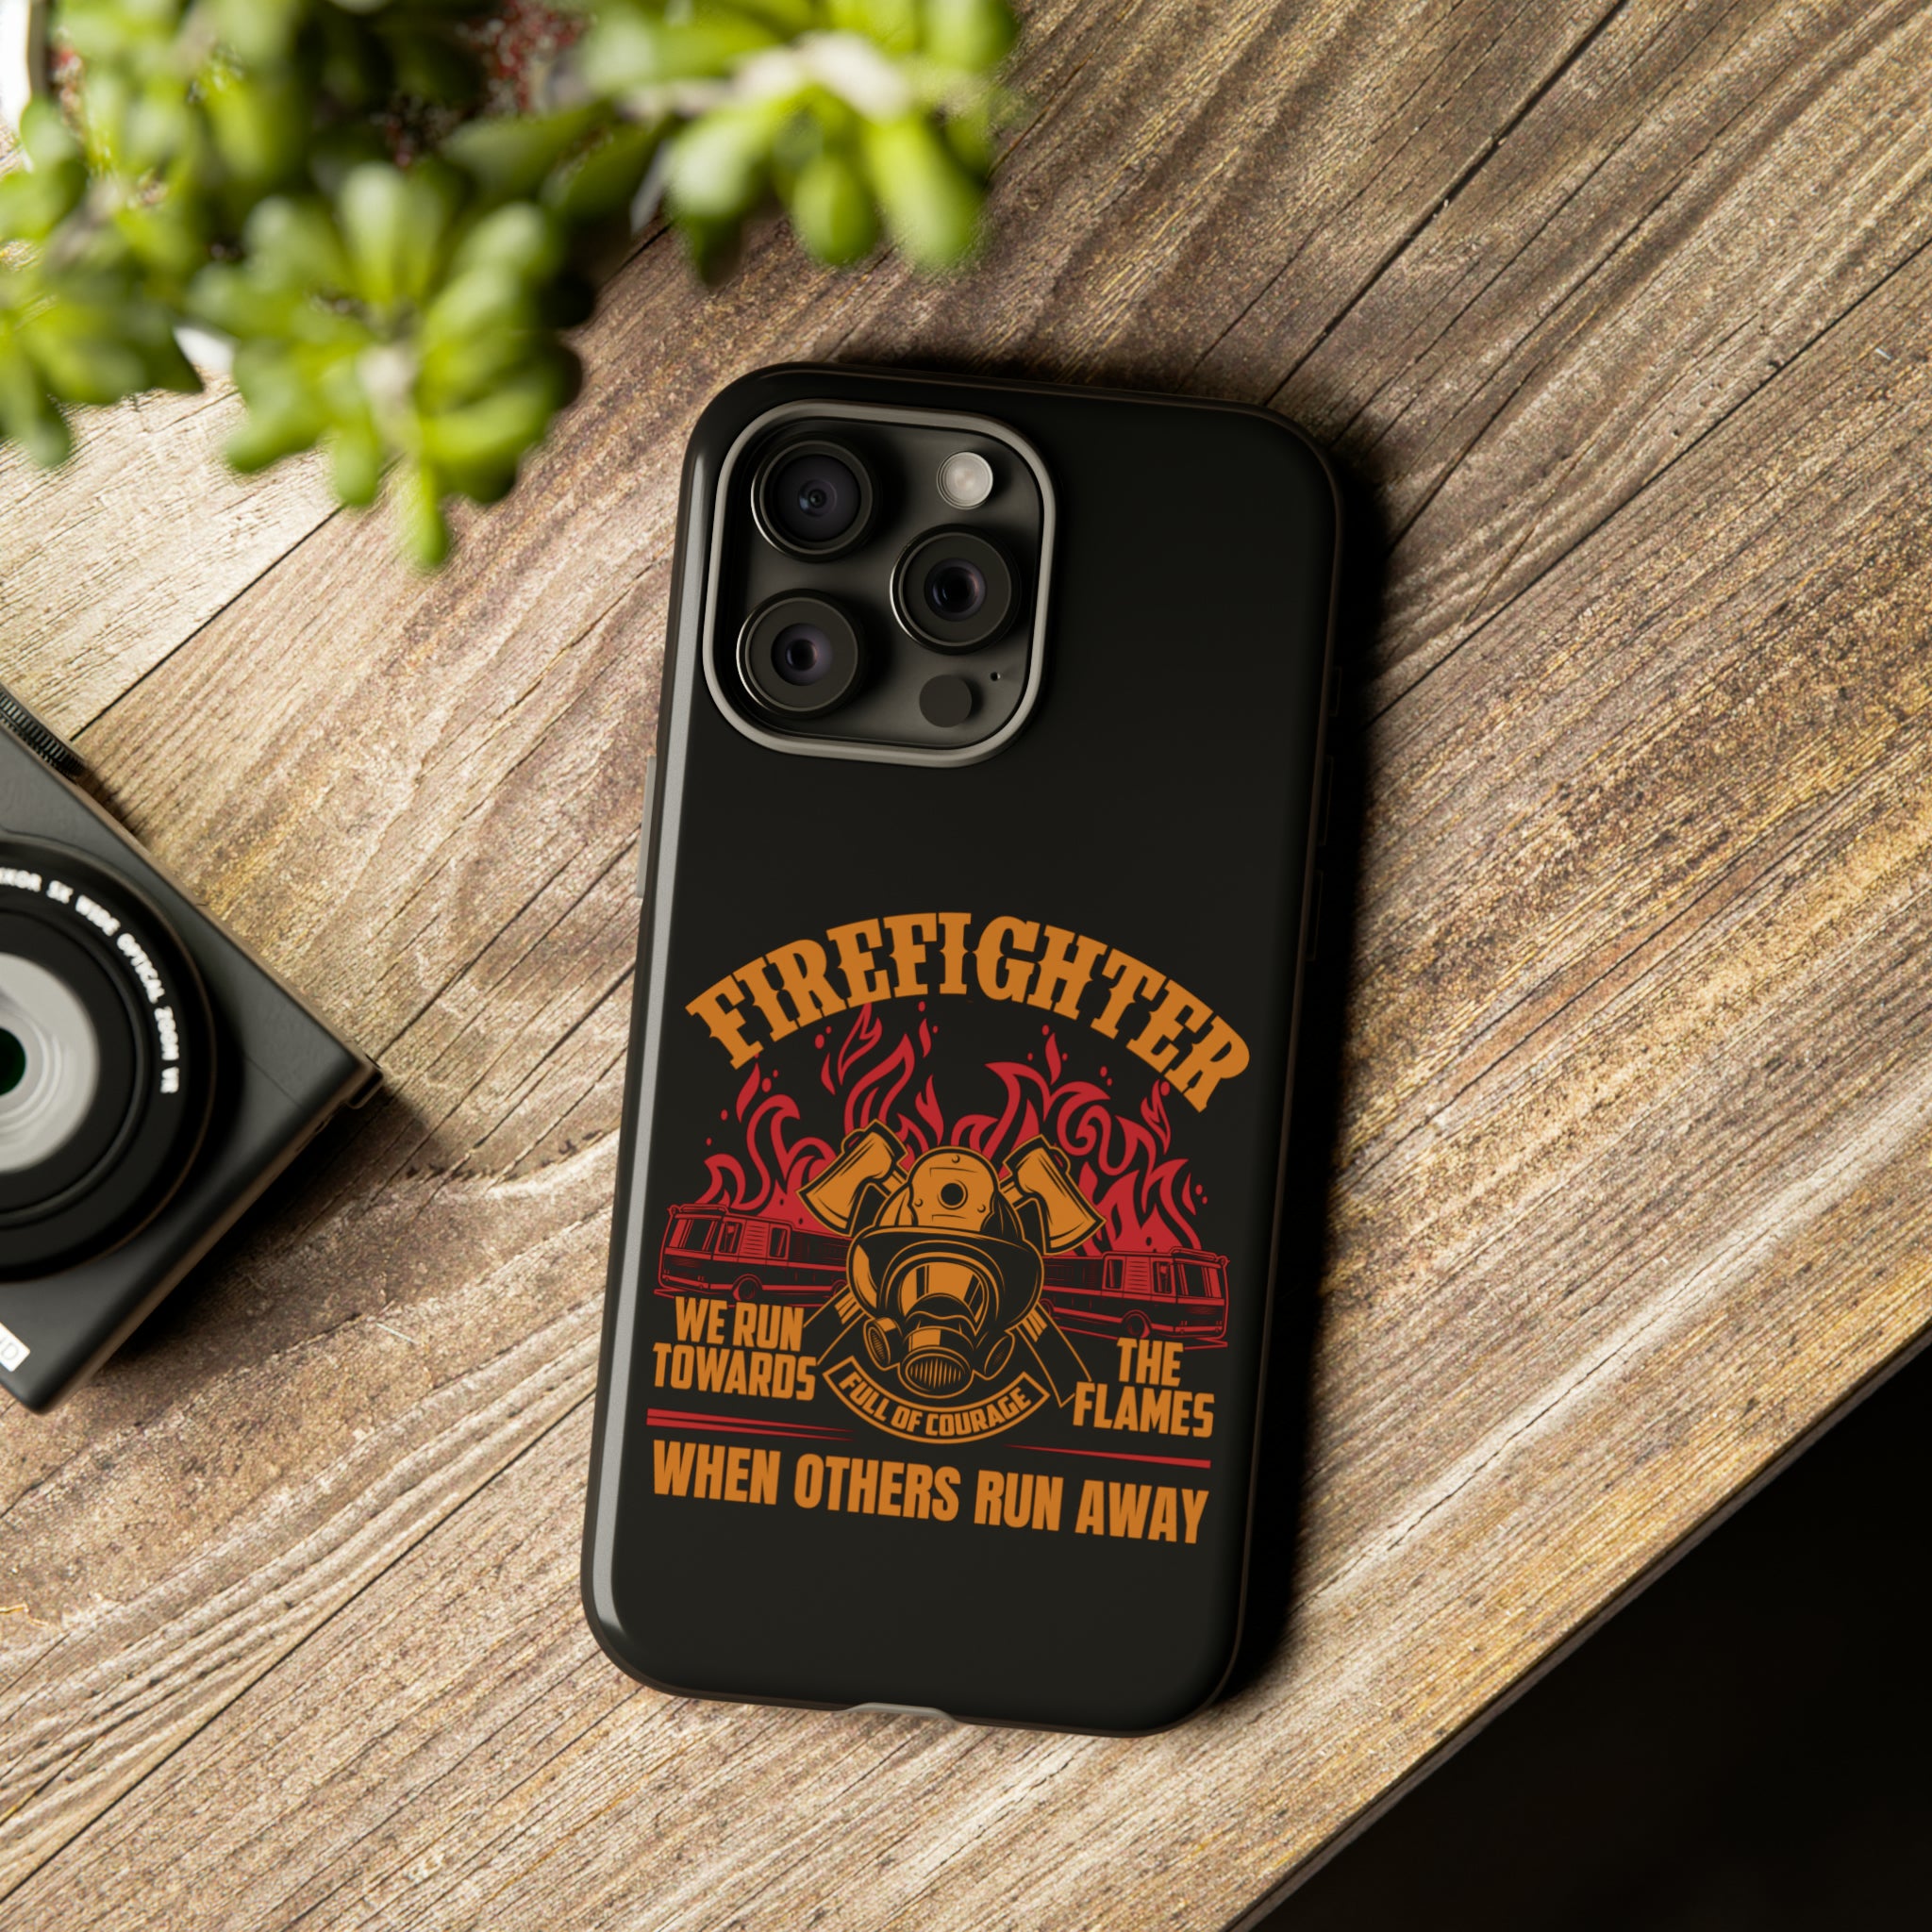 Firefighter Graphic Tough Phone Case - Two Firetrucks, Crossed Axes, Fire Helmet - iPhone, Google Pixel, Samsung - Matte/Glossy